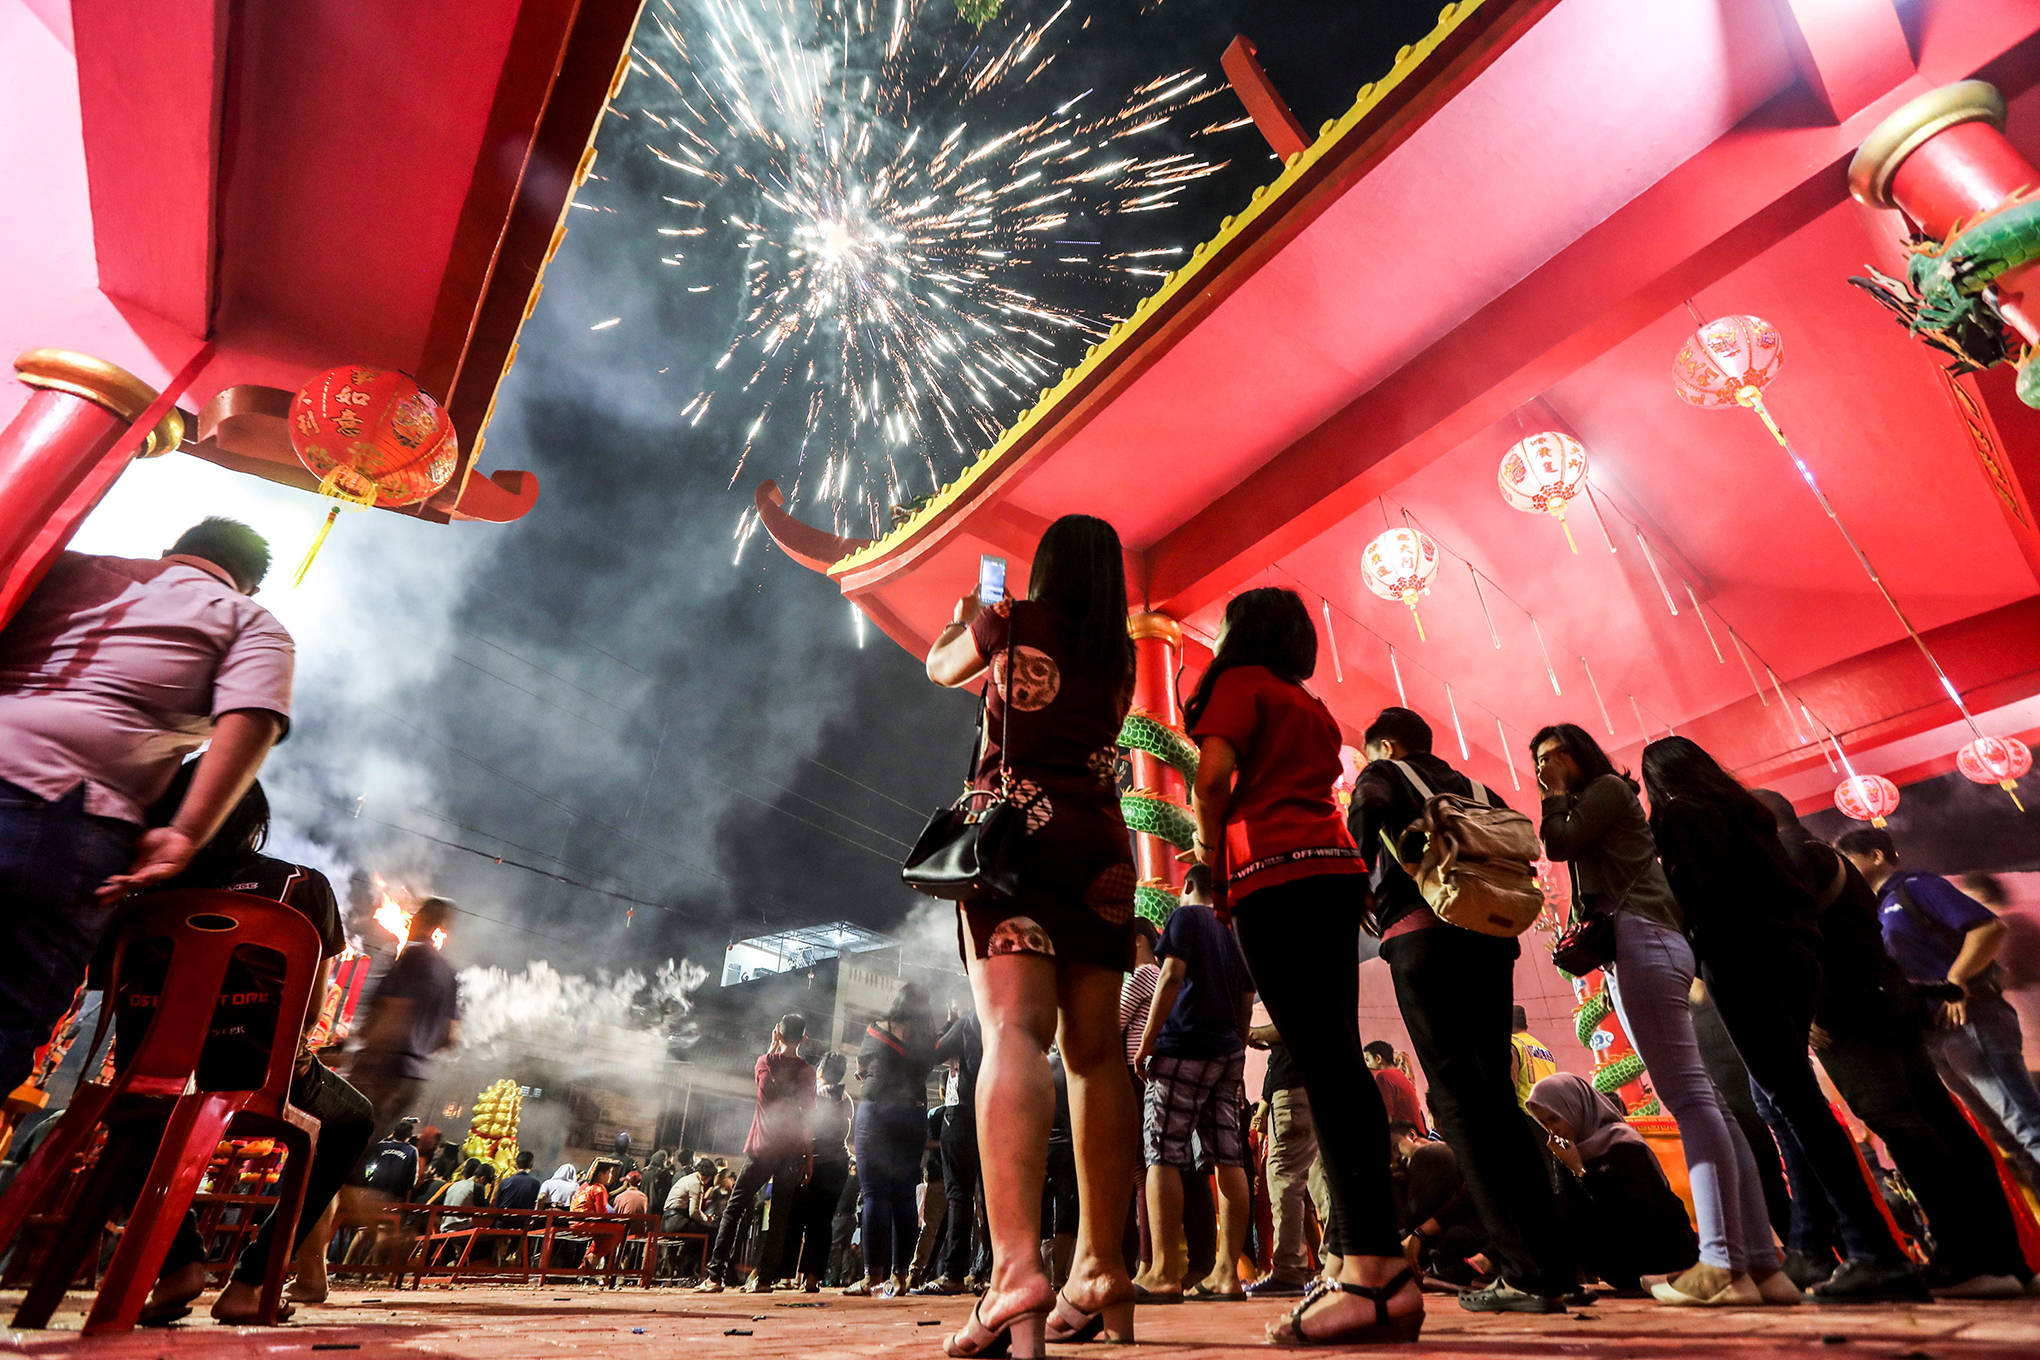 Fireworks light up the sky during the Chinese New Year Eve celebrations at the Pak Pie Hut Cou temple in Medan, North Sumatra, Indonesia, Feb. 16, 2018.